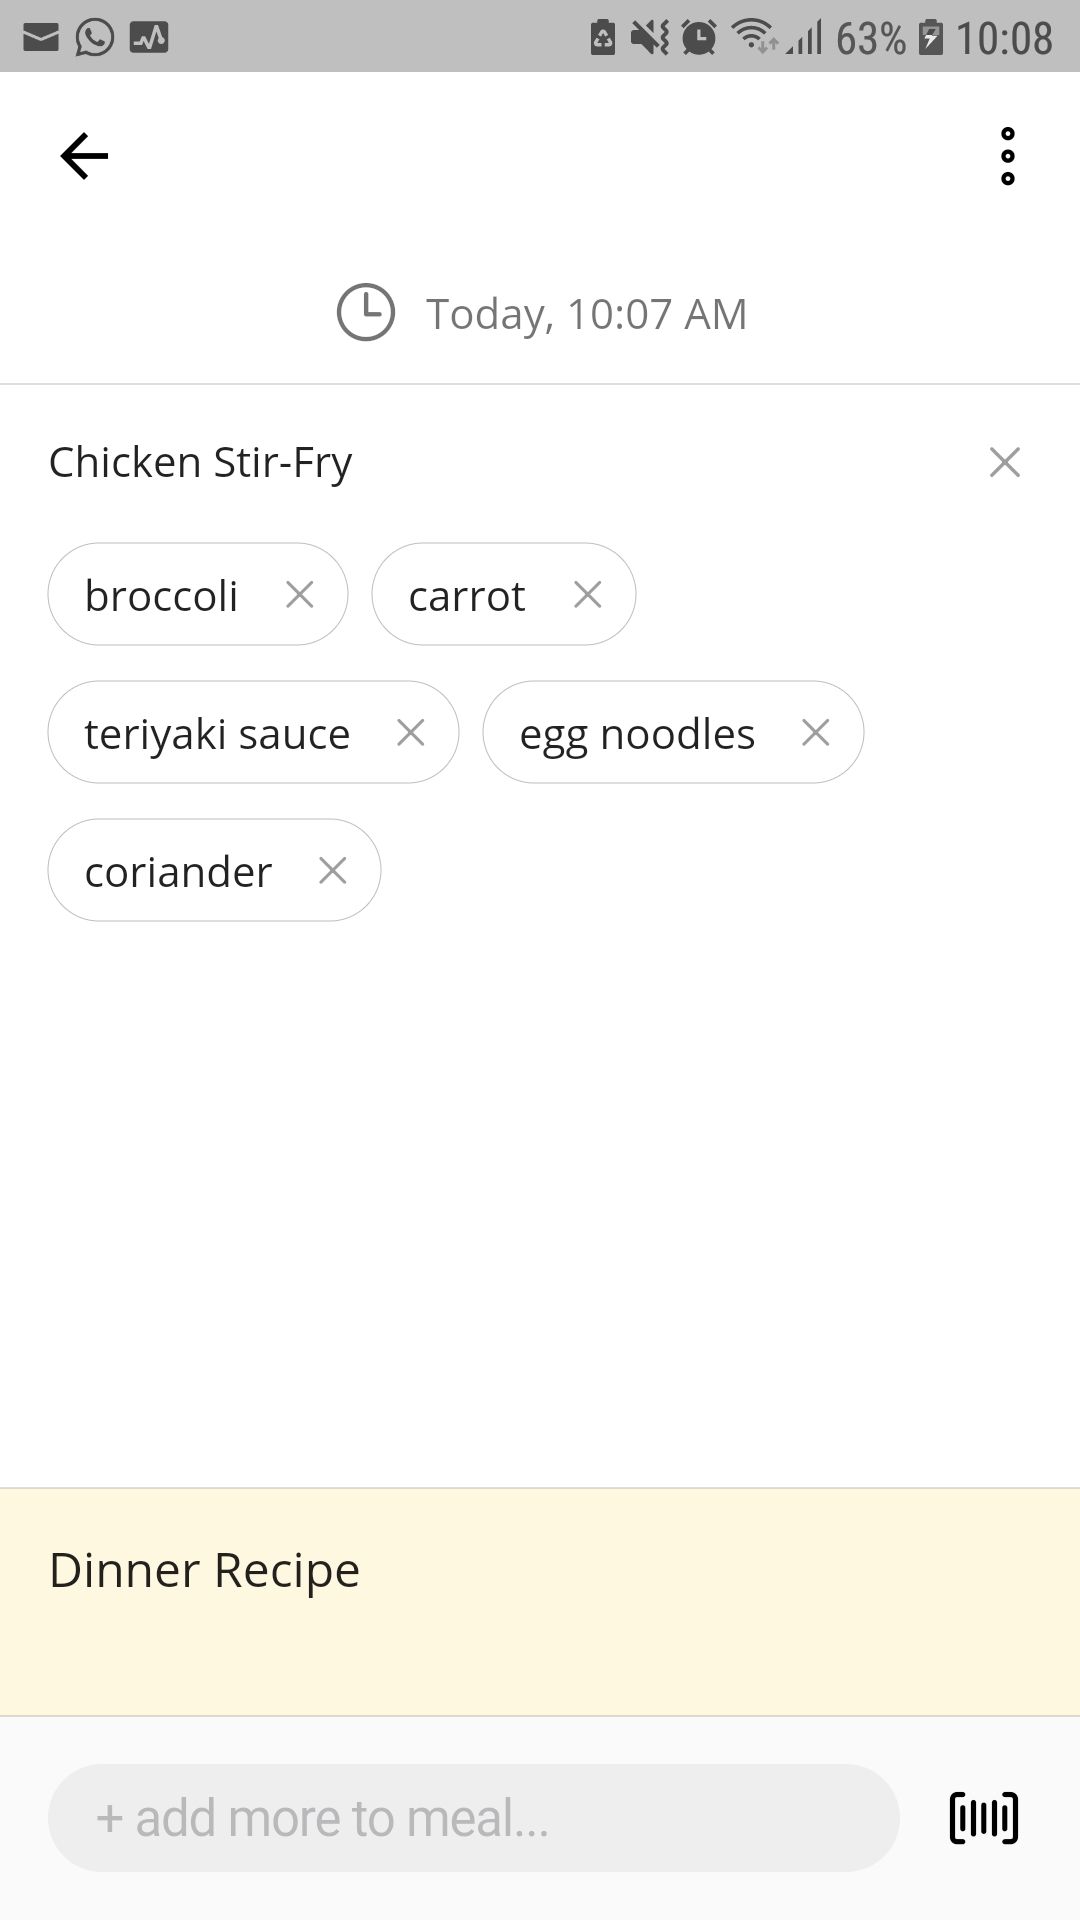 Endive mobile IBS app adding meal